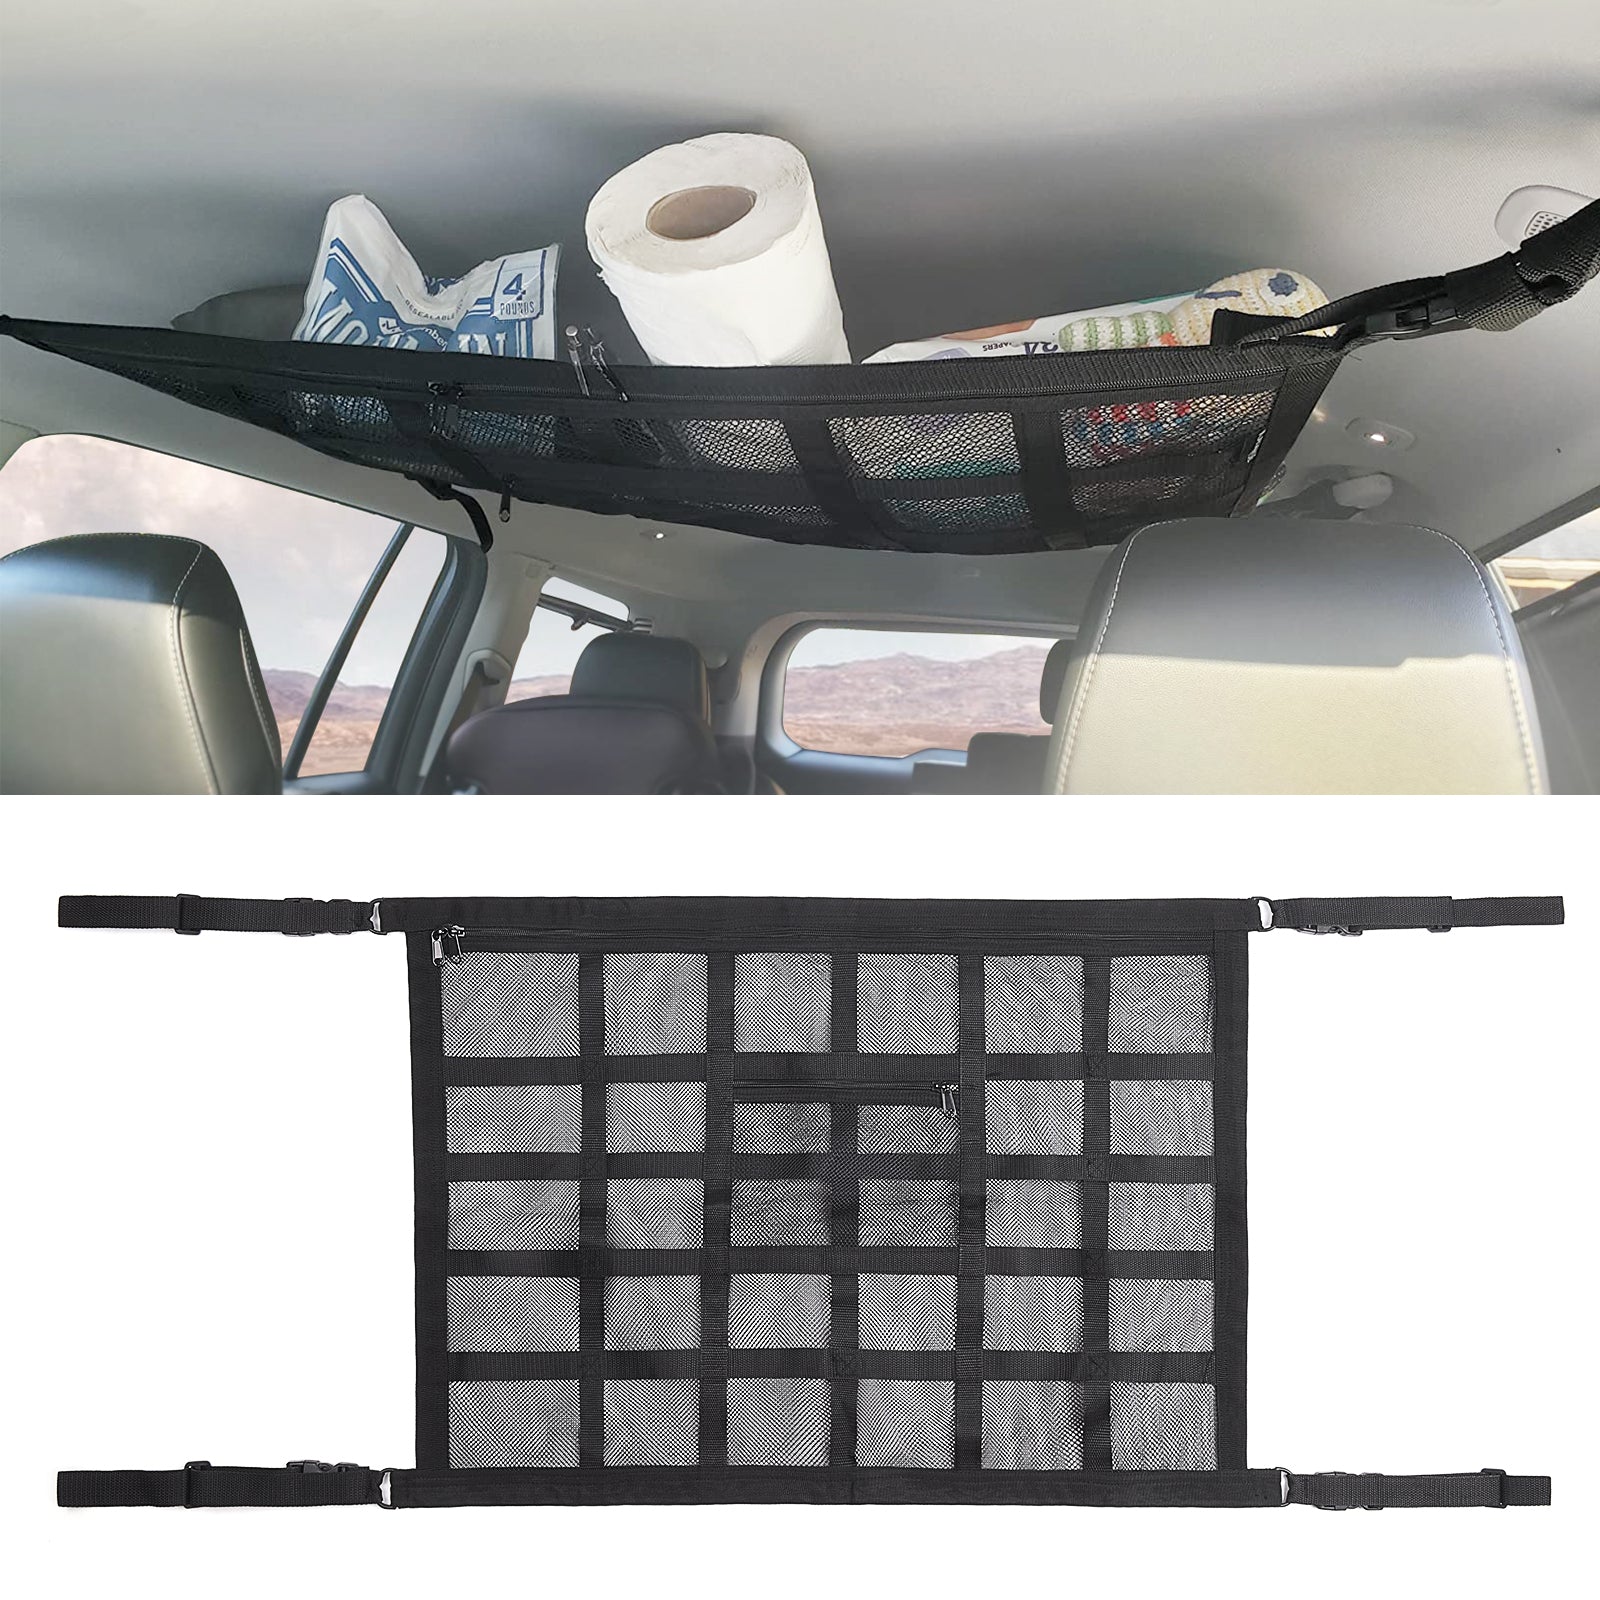 Car Ceiling Cargo Net, 31.5"x21.6" Strong Bearing Capacity Roof Cargo Net, Droopless Double-Layer Mesh Car Roof Storage Organizer